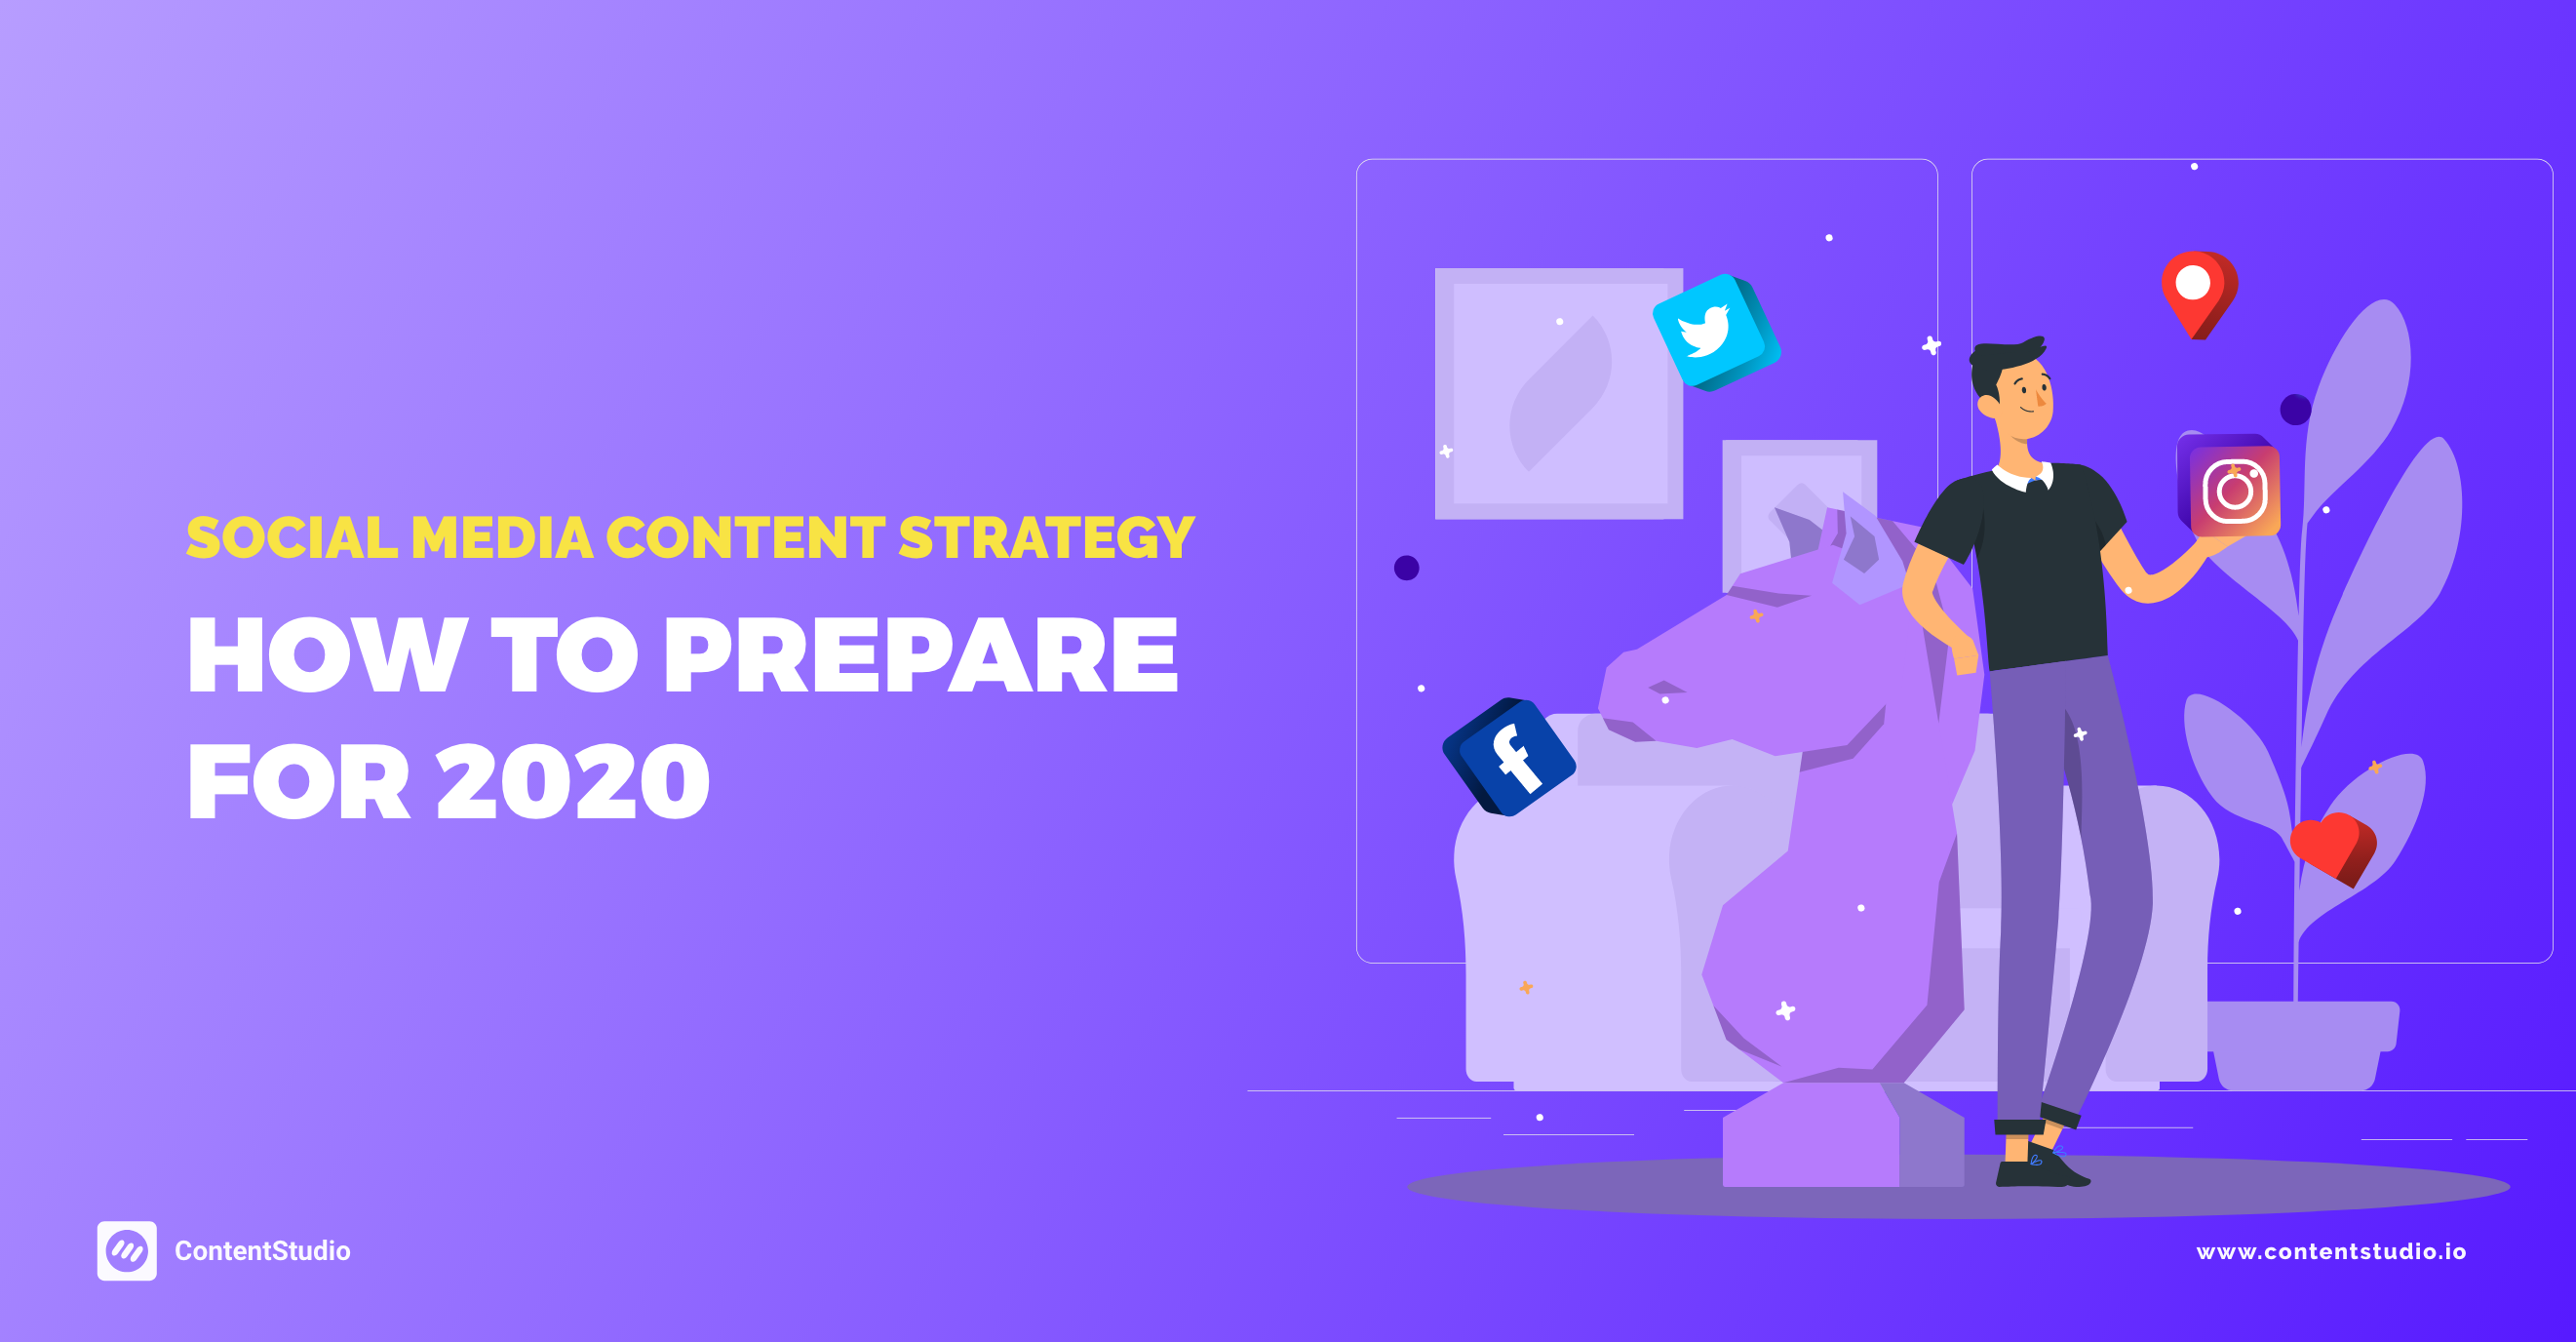 Social Media Content Strategy: How to Prepare for 2020